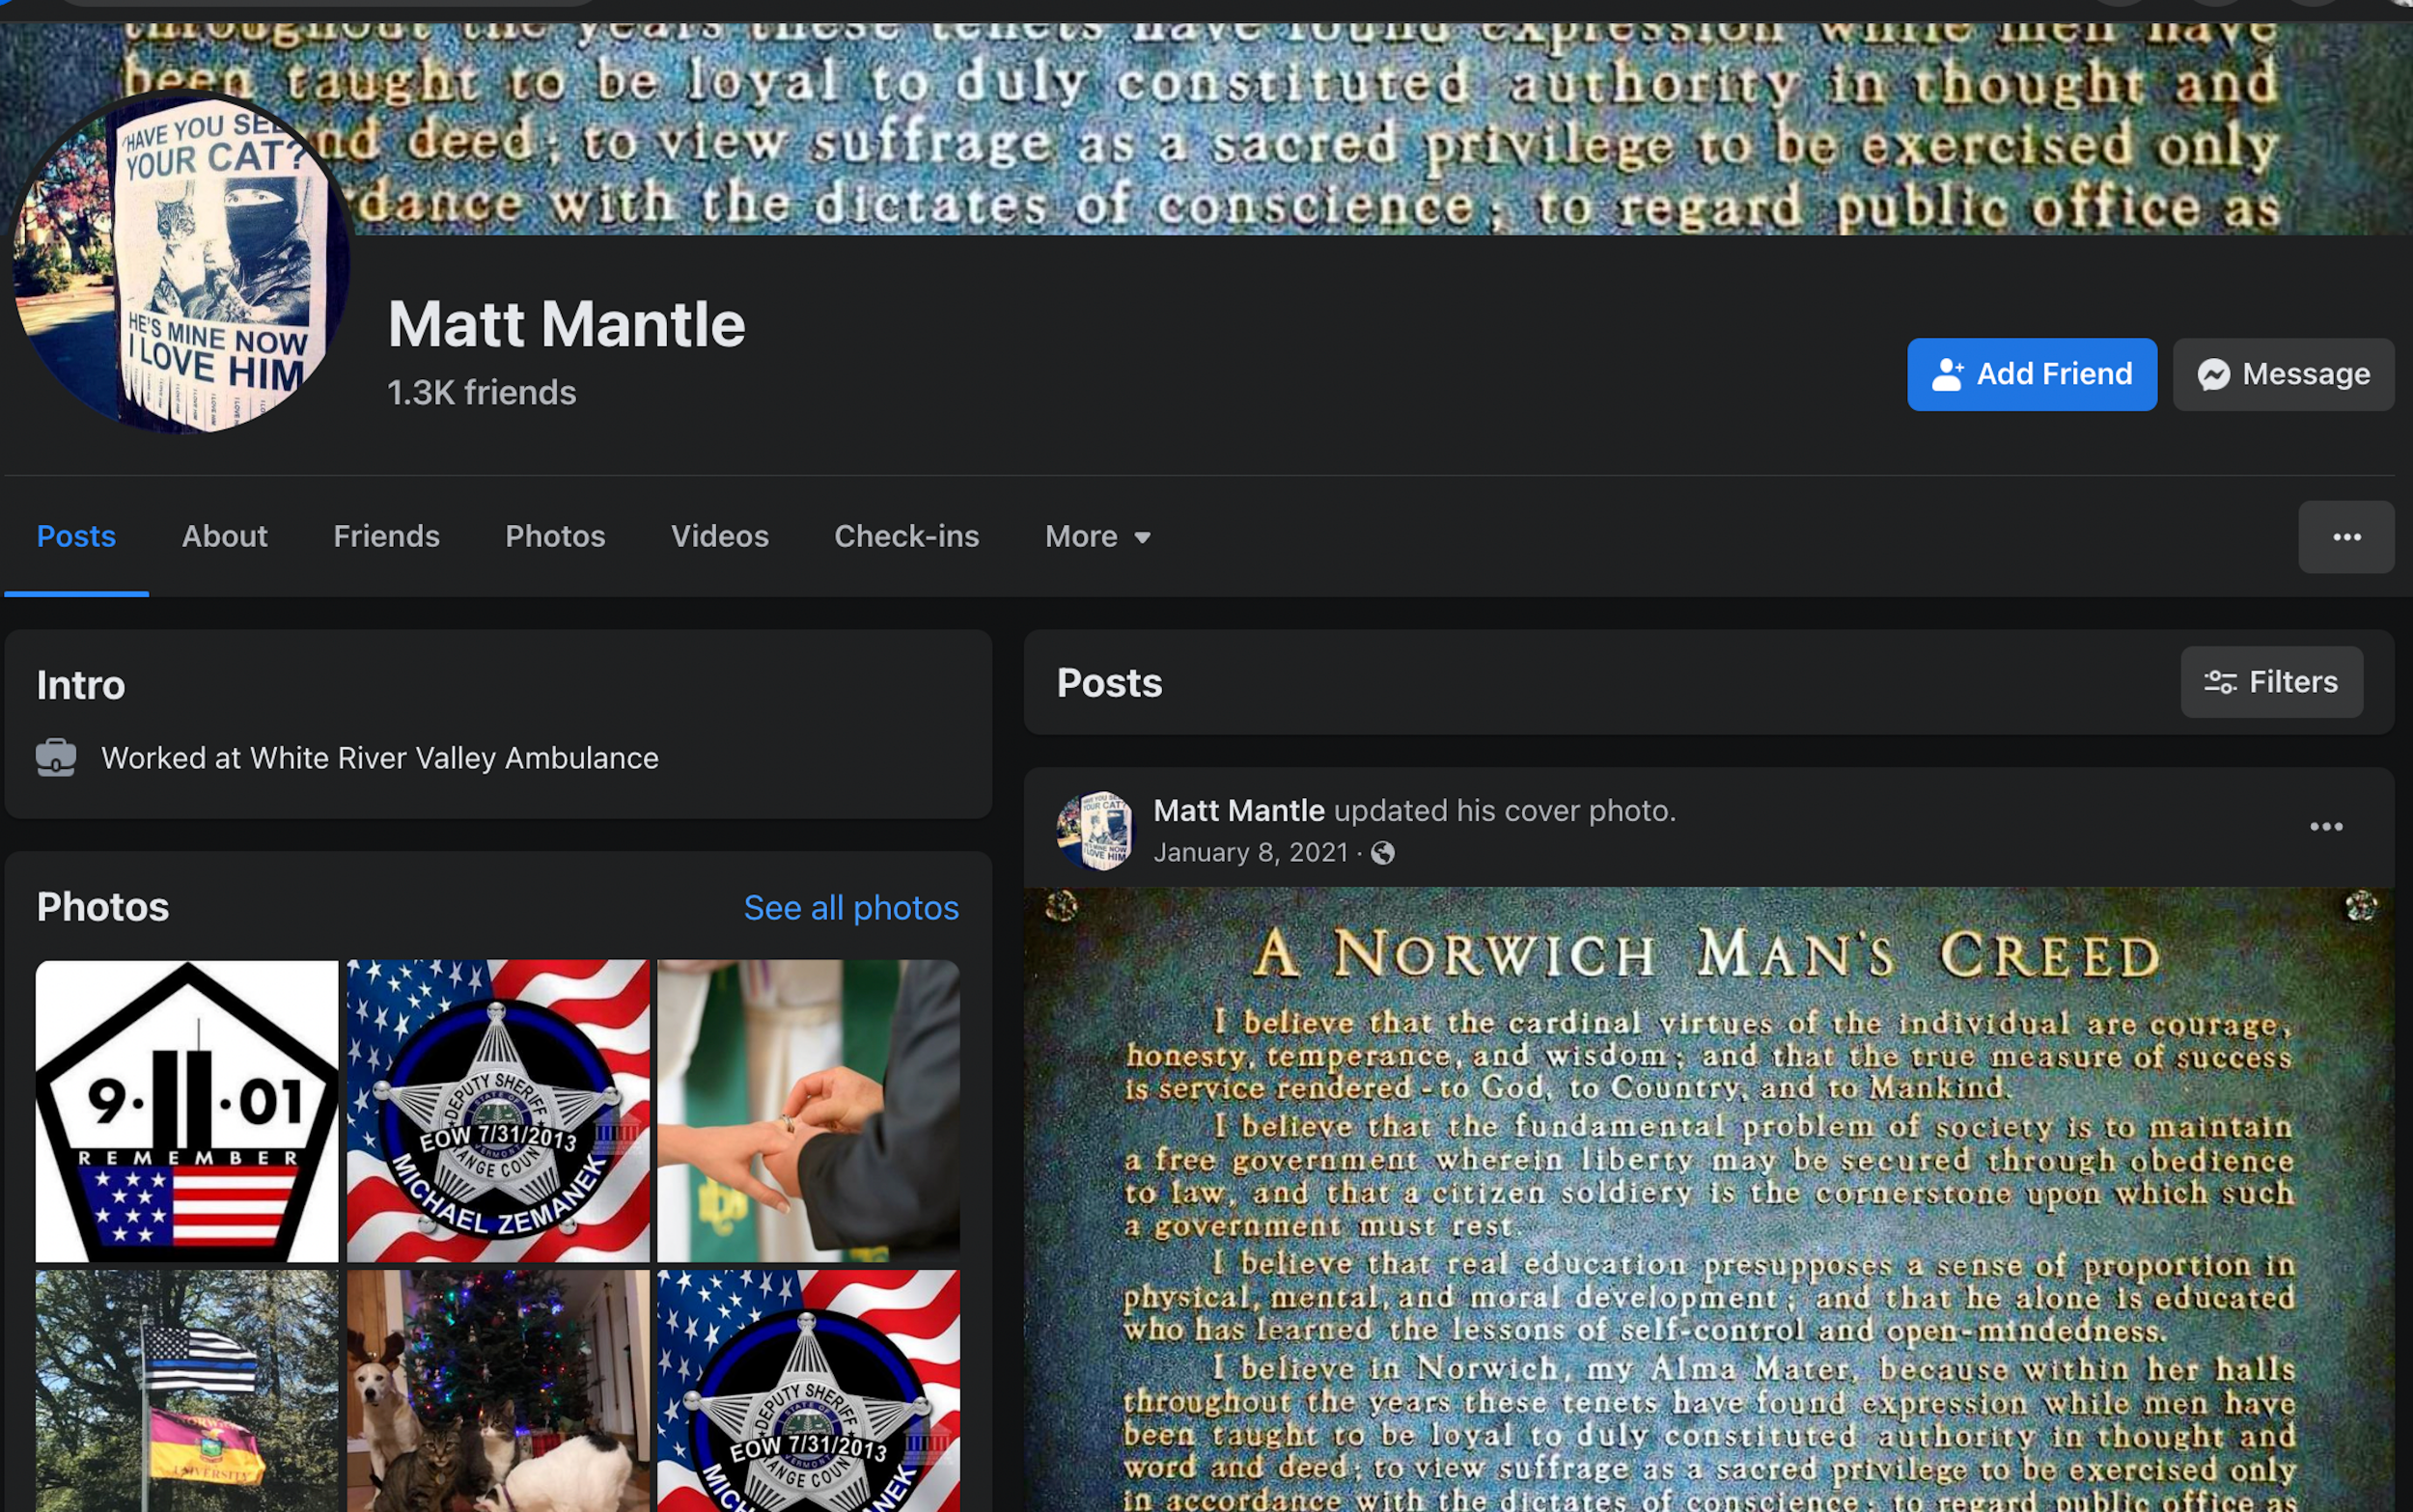 Matthew Chin (as "Matt Mantle")'s FB page, showing that he has 1.3K friends. Banner and pinned post (as of Jan. 8 2021) is a closeup of a plaque reading "A Norwich Man's Creed," listing a set of beliefs concerning individuals, God, Country, society, importance of a 'free government,' etc. Plaque is from Norwich University in VT. Photos include graphic that says "Remember 9/11" with icon of towers and American flag; sheriff badge icon reading "Michael Zemanek" against American flag background; closeup of man putting ring on woman's finger; thin blue line flag waving above Norwich University flag; picture of dogs around a Christmas tree; second Michael Zemanek sheriff icon